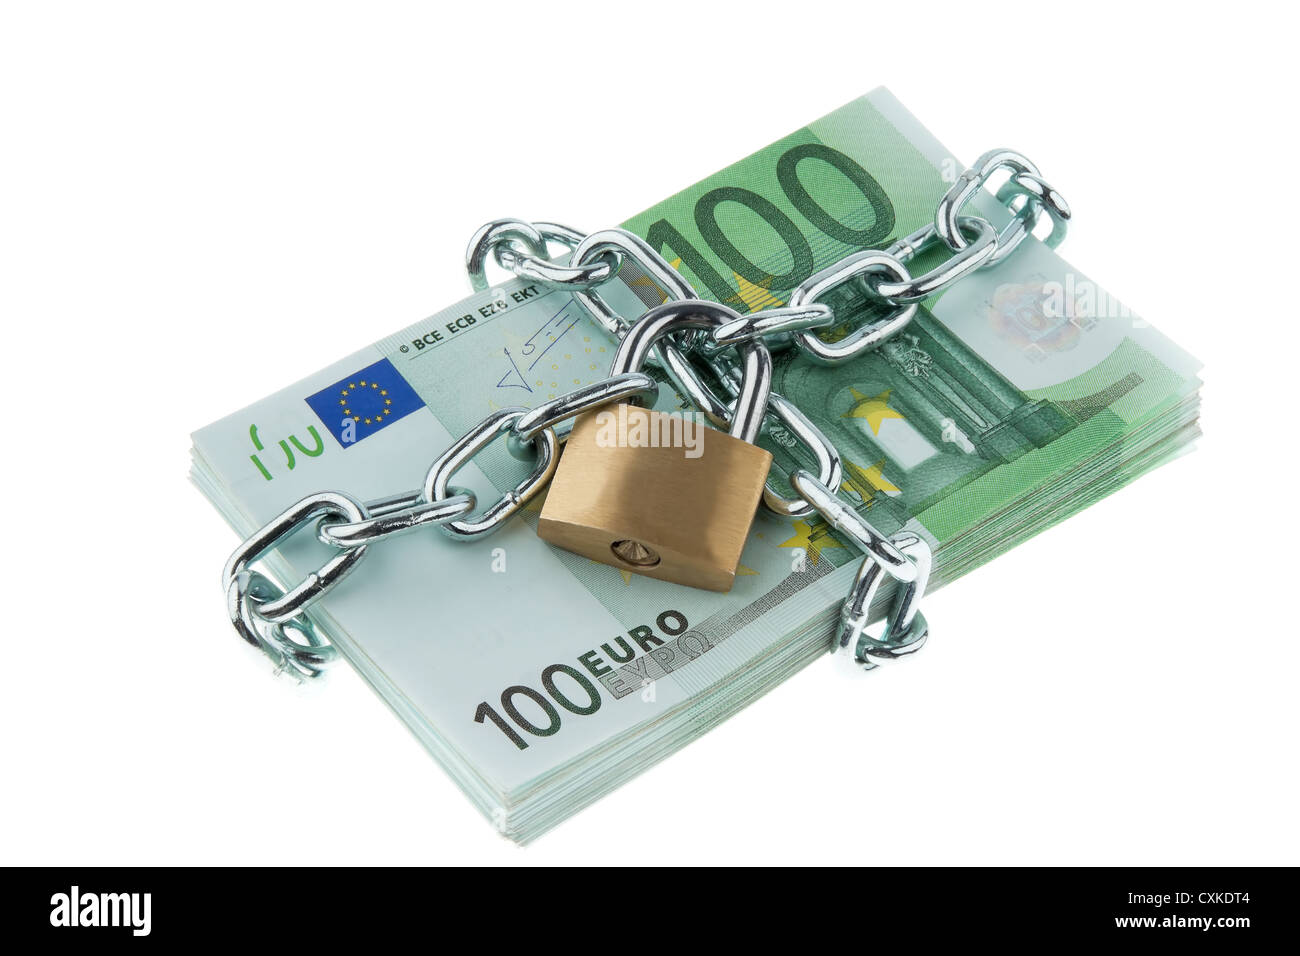 Euro bank notes with a lock and chain. Stock Photo